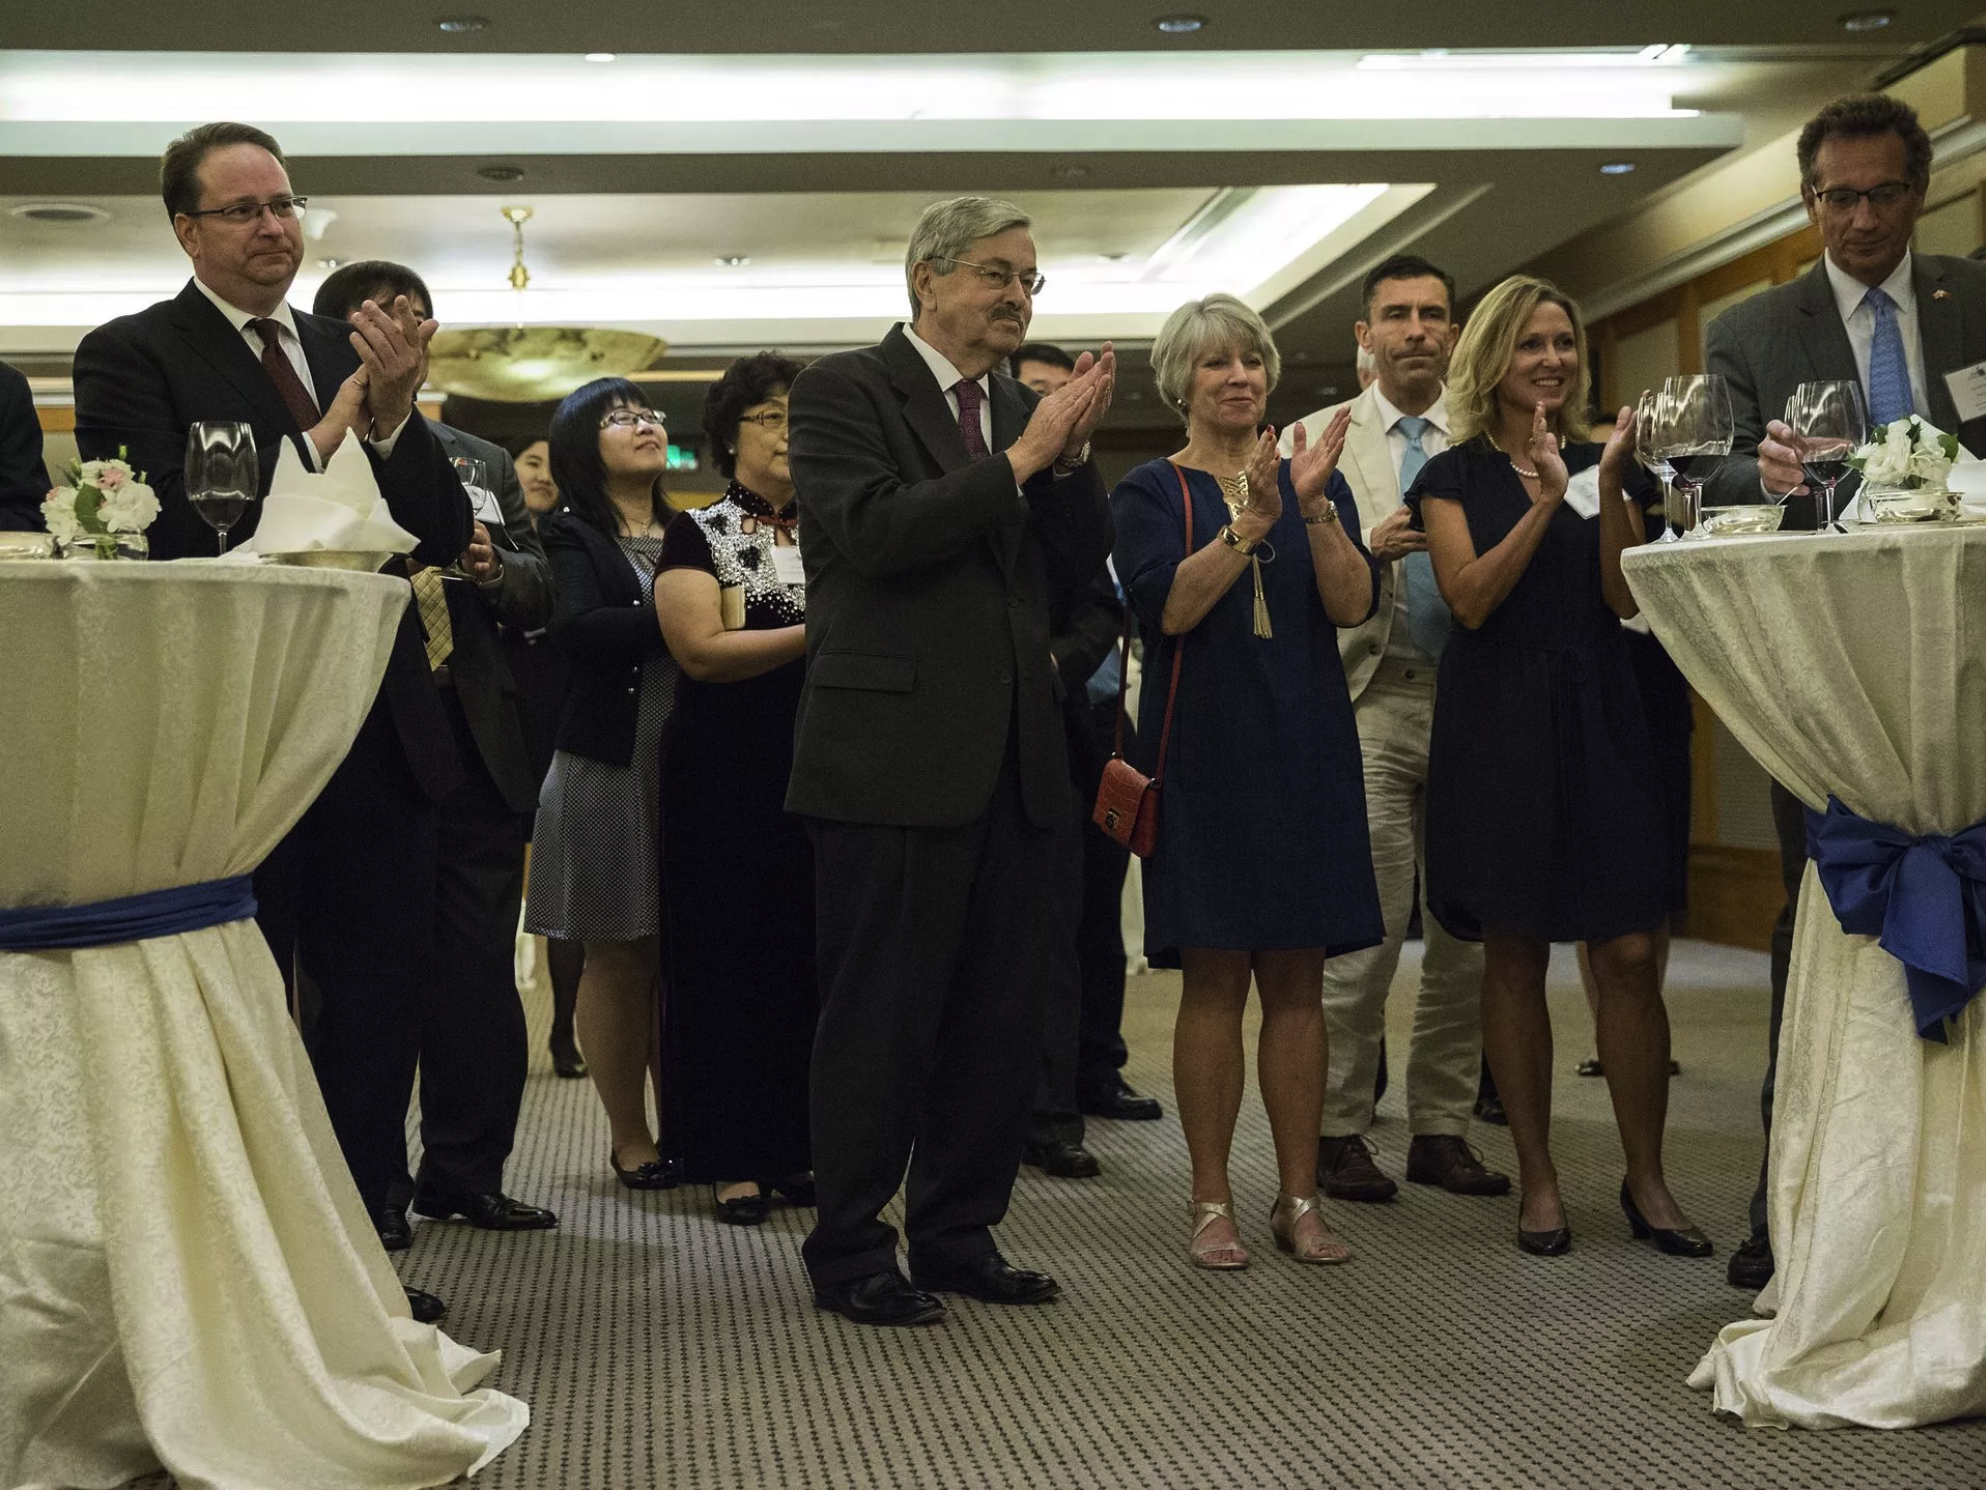 Terry Branstad, U.S. ambassador to China, with his wife Chris Branstad attend a reception hosted by the Iowa Sister States organization on Wednesday, Sept. 20, 2017, in Beijing, China. Image by Kelsey Kremer. China, 2017.